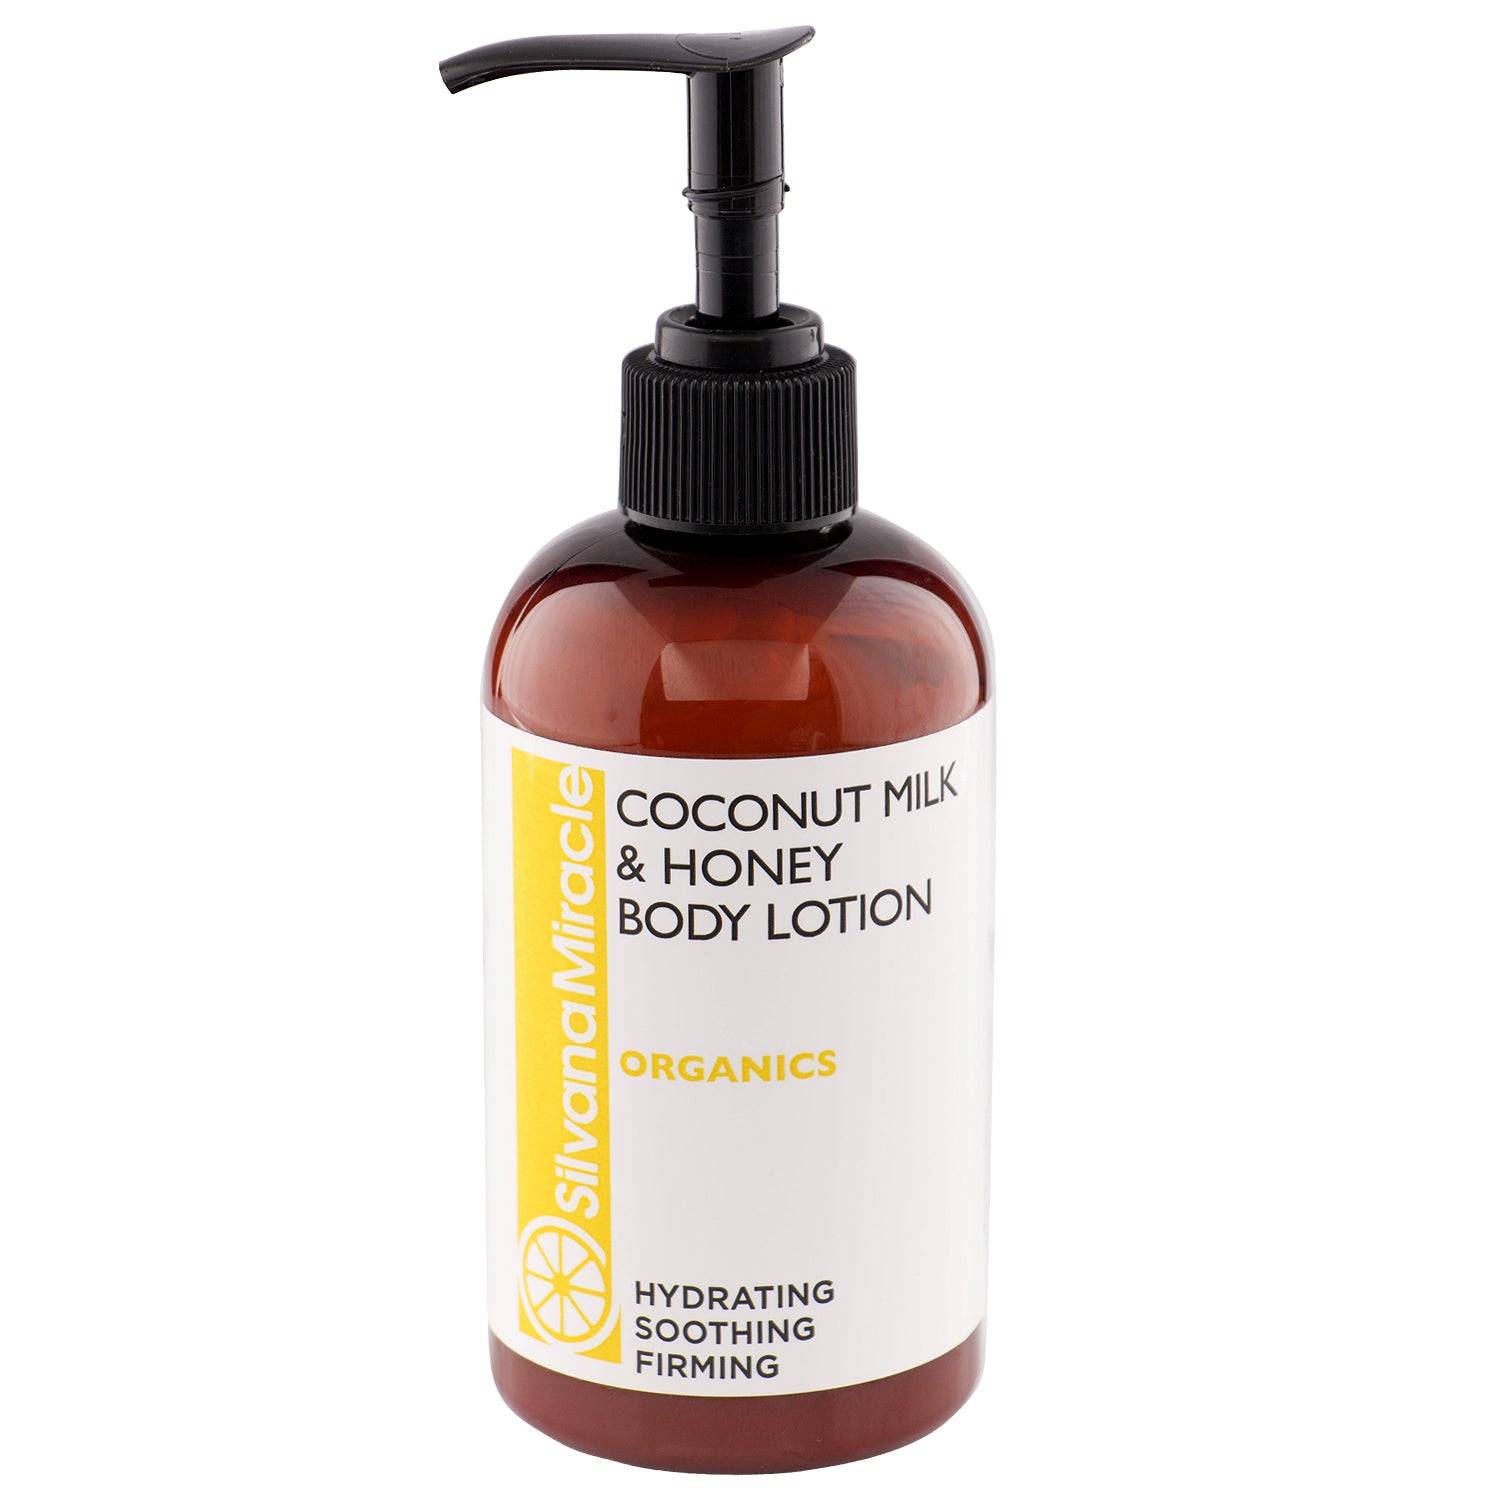 Coconut Milk and Honey Body Lotion / Hydrating / Soothing / Calming / 8 oz